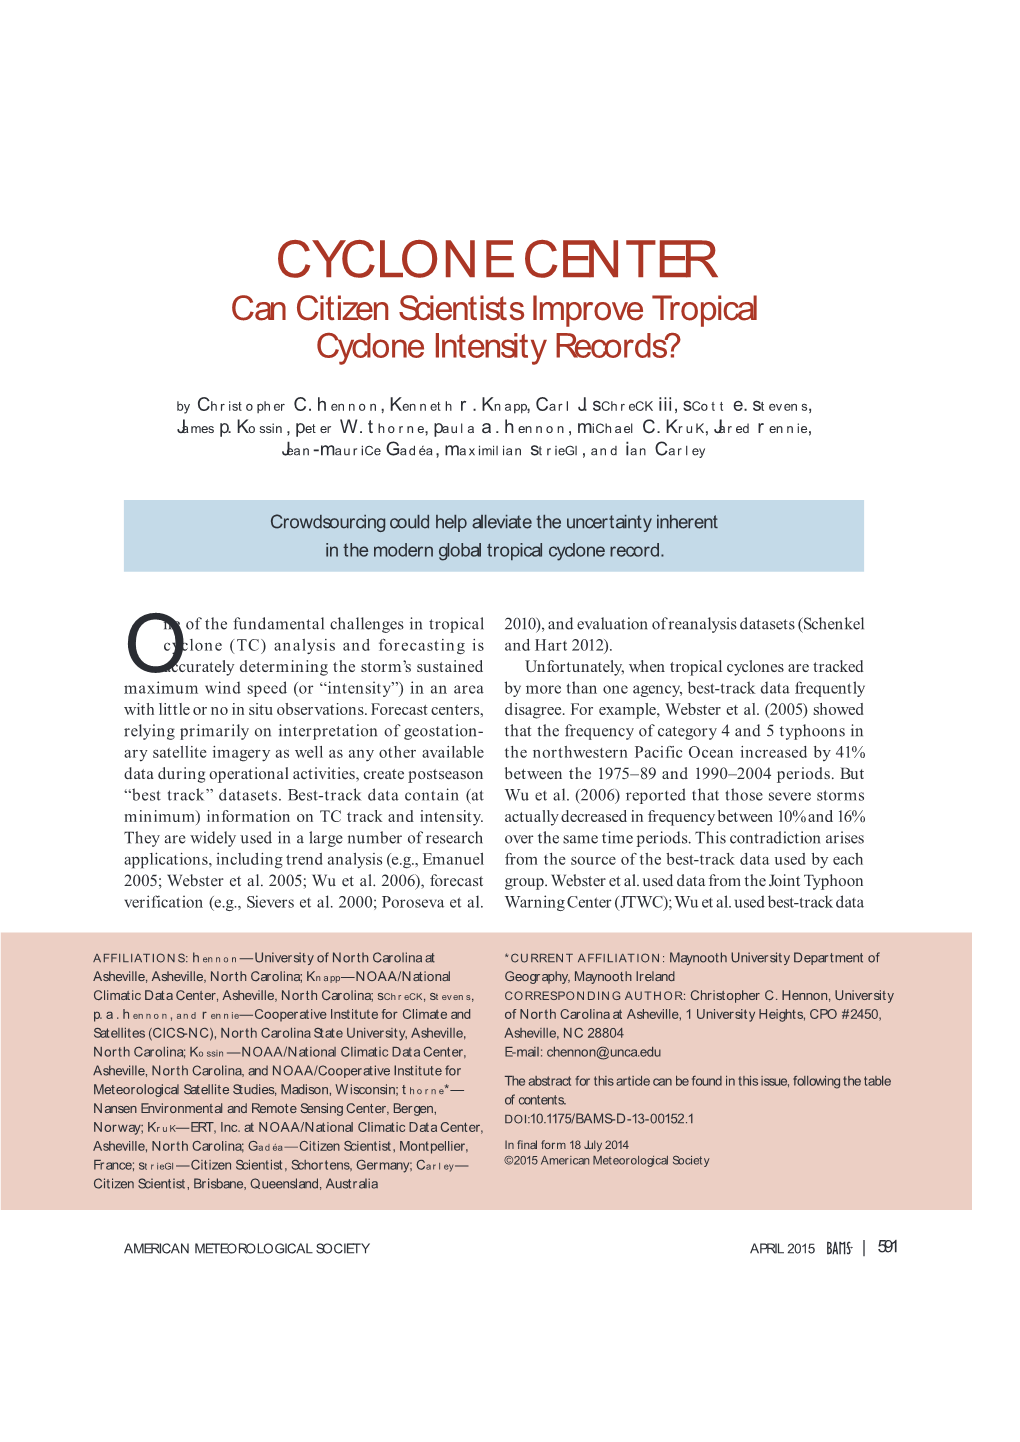 CYCLONE CENTER Can Citizen Scientists Improve Tropical Cyclone Intensity Records?